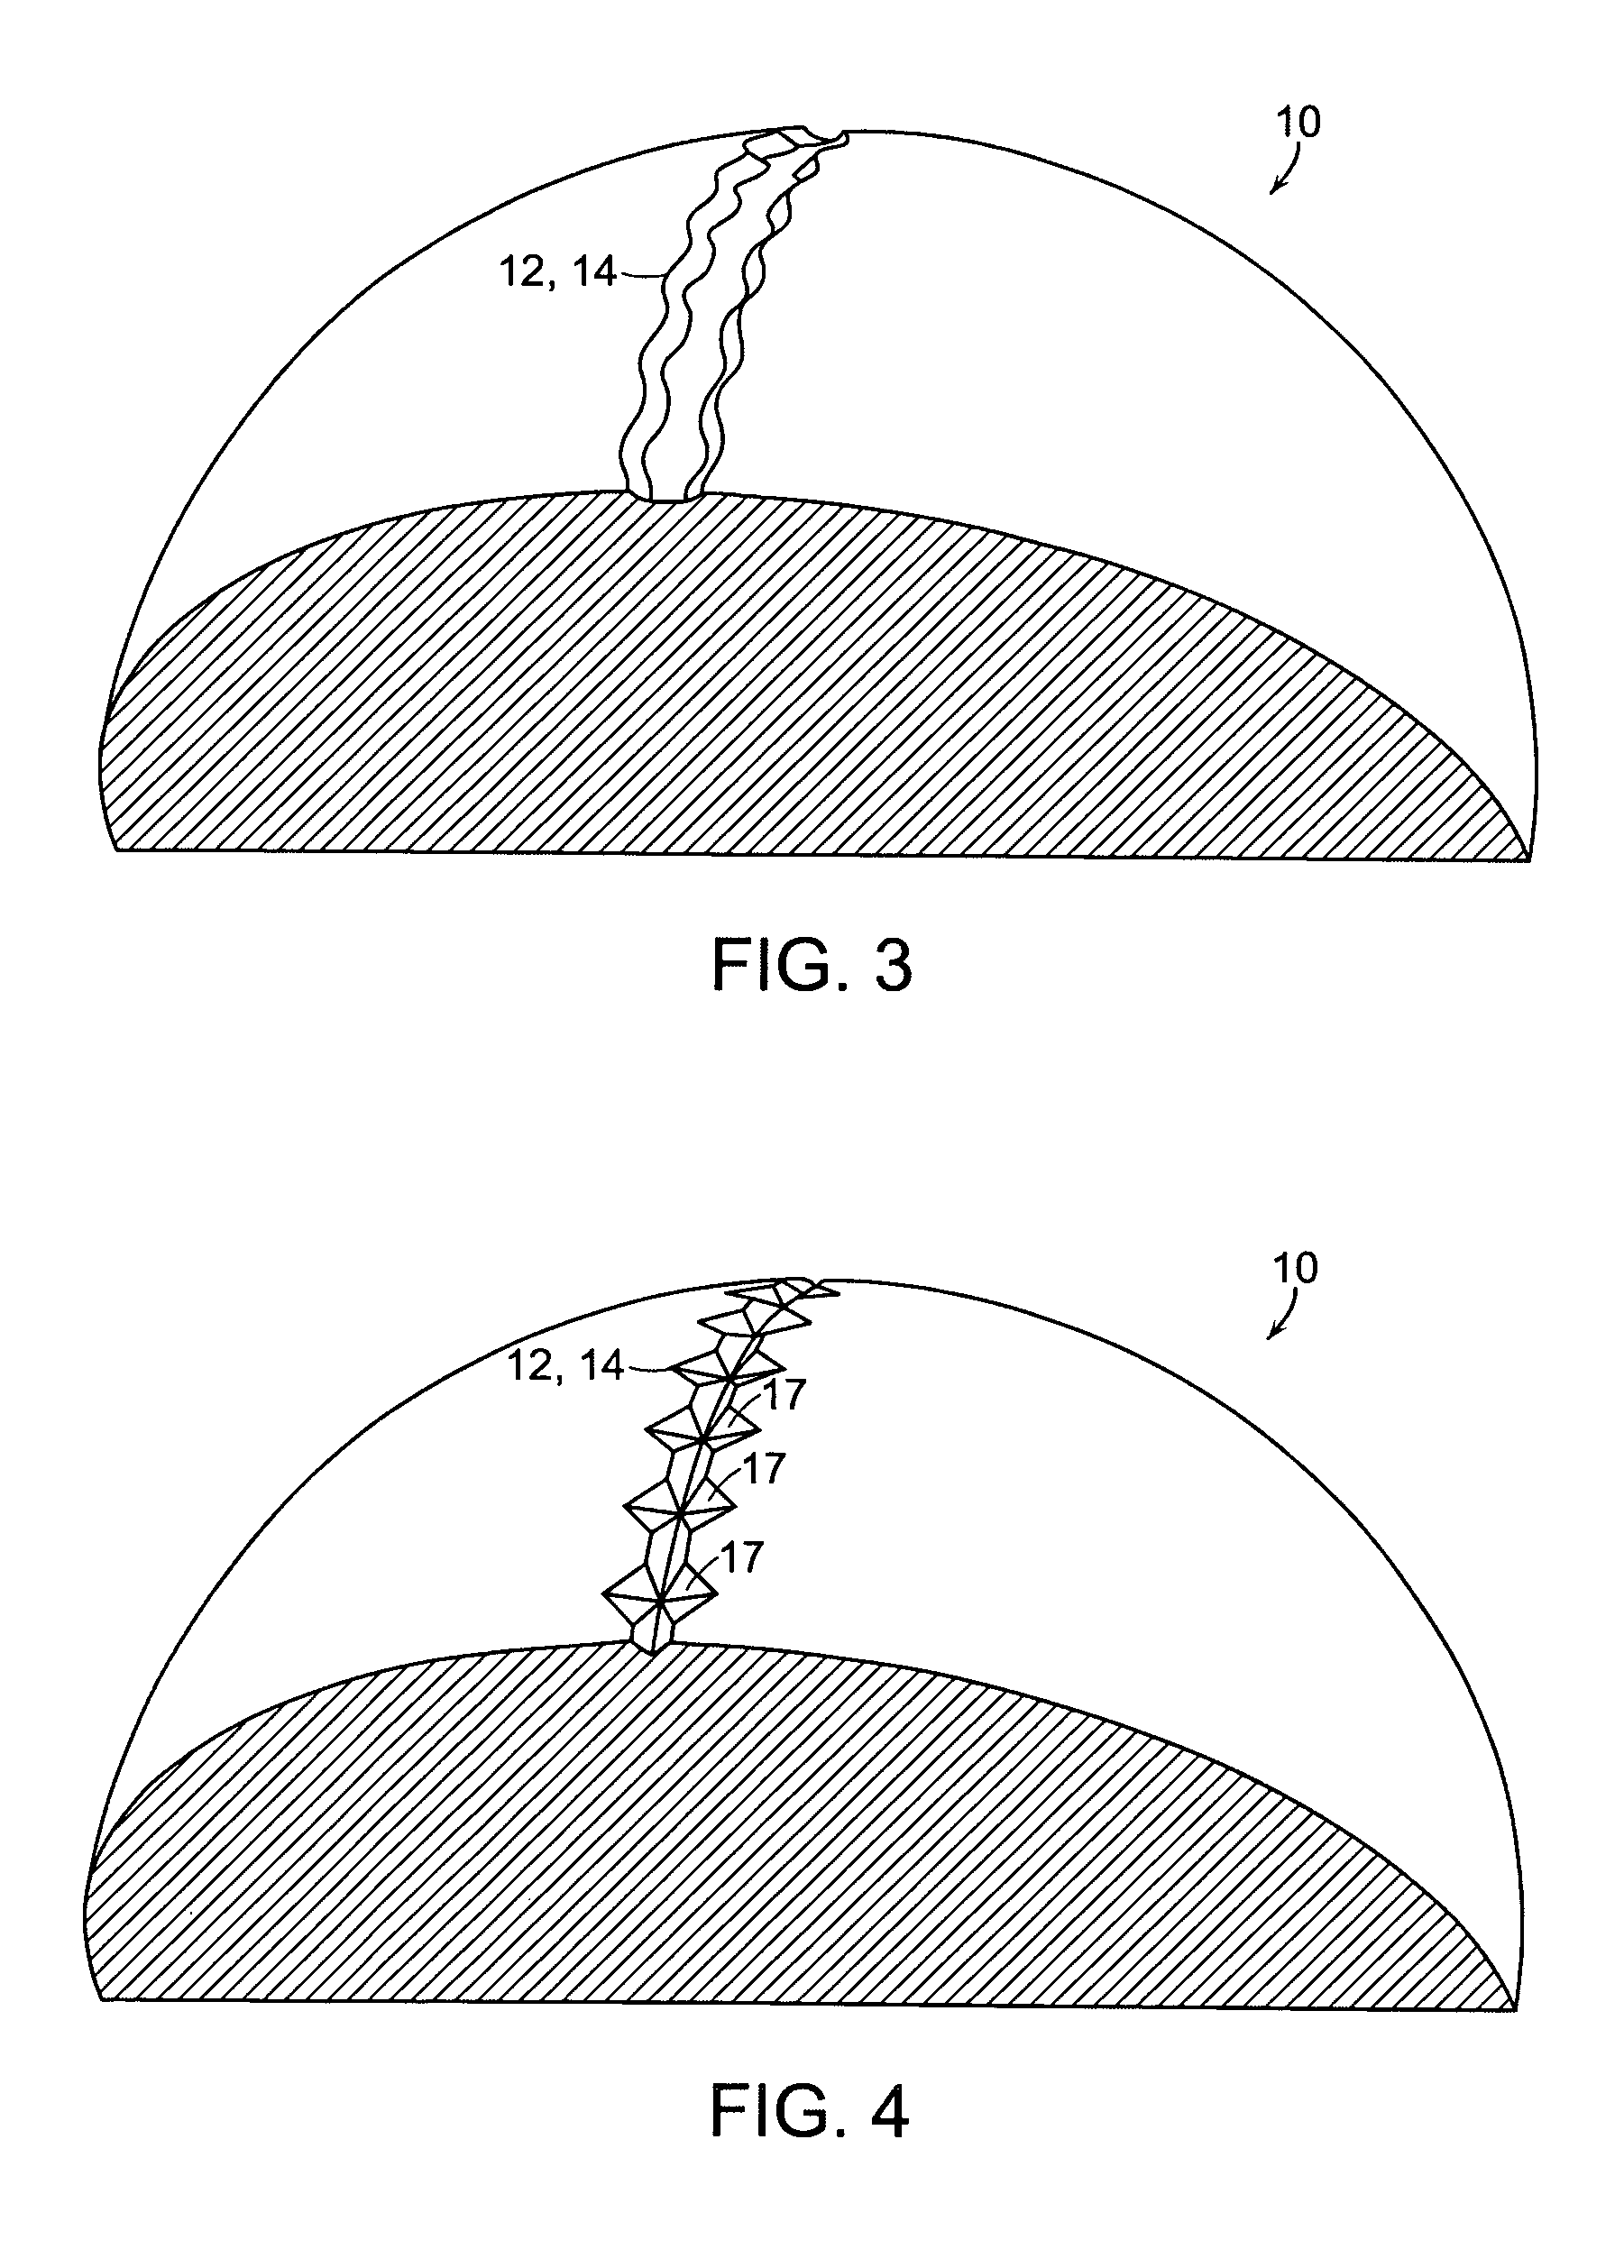 Golf ball surface patterns comprising variable width/depth multiple channels